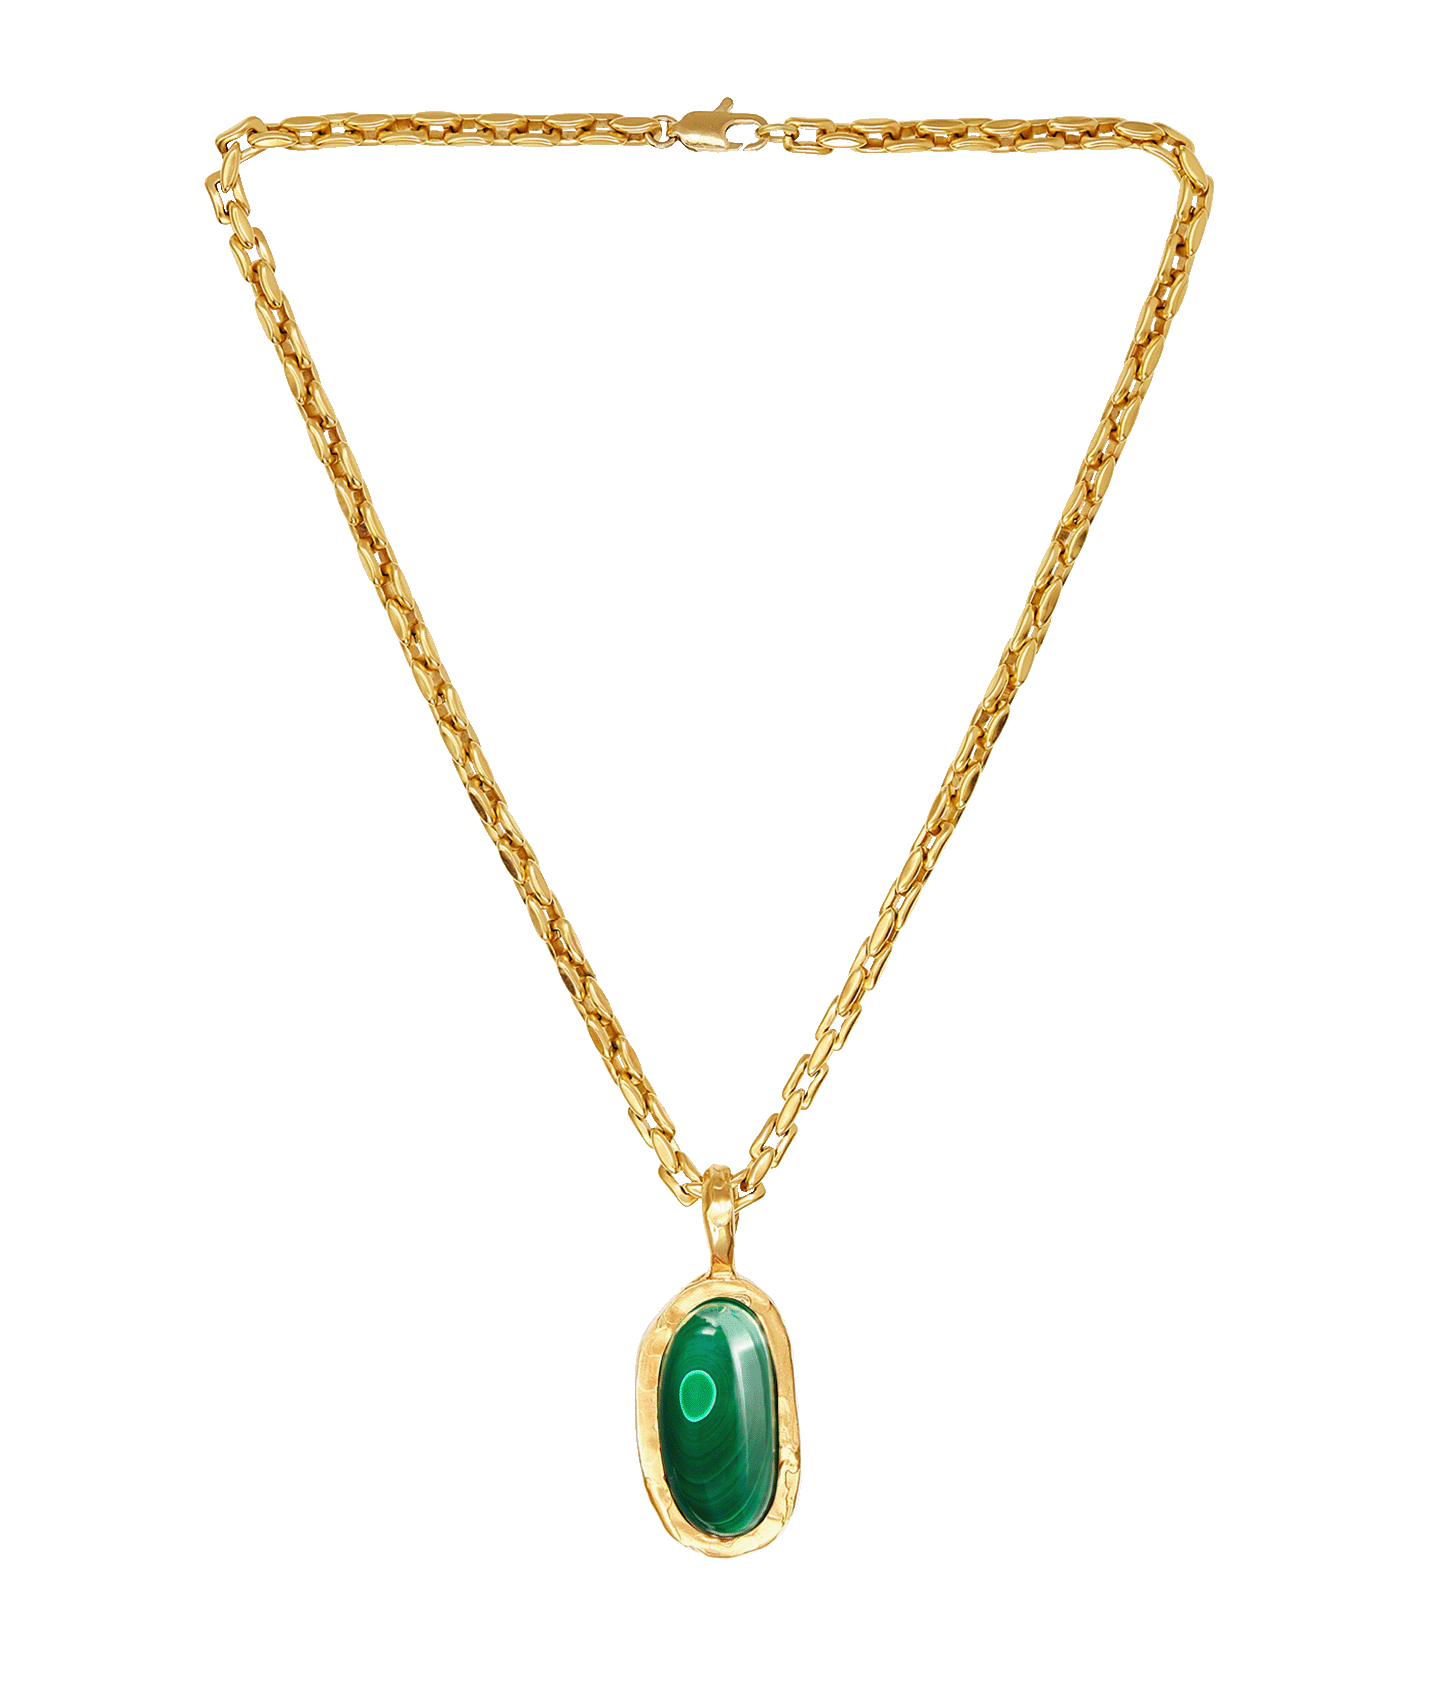 The Sliver of the Mountain Malachite Necklace